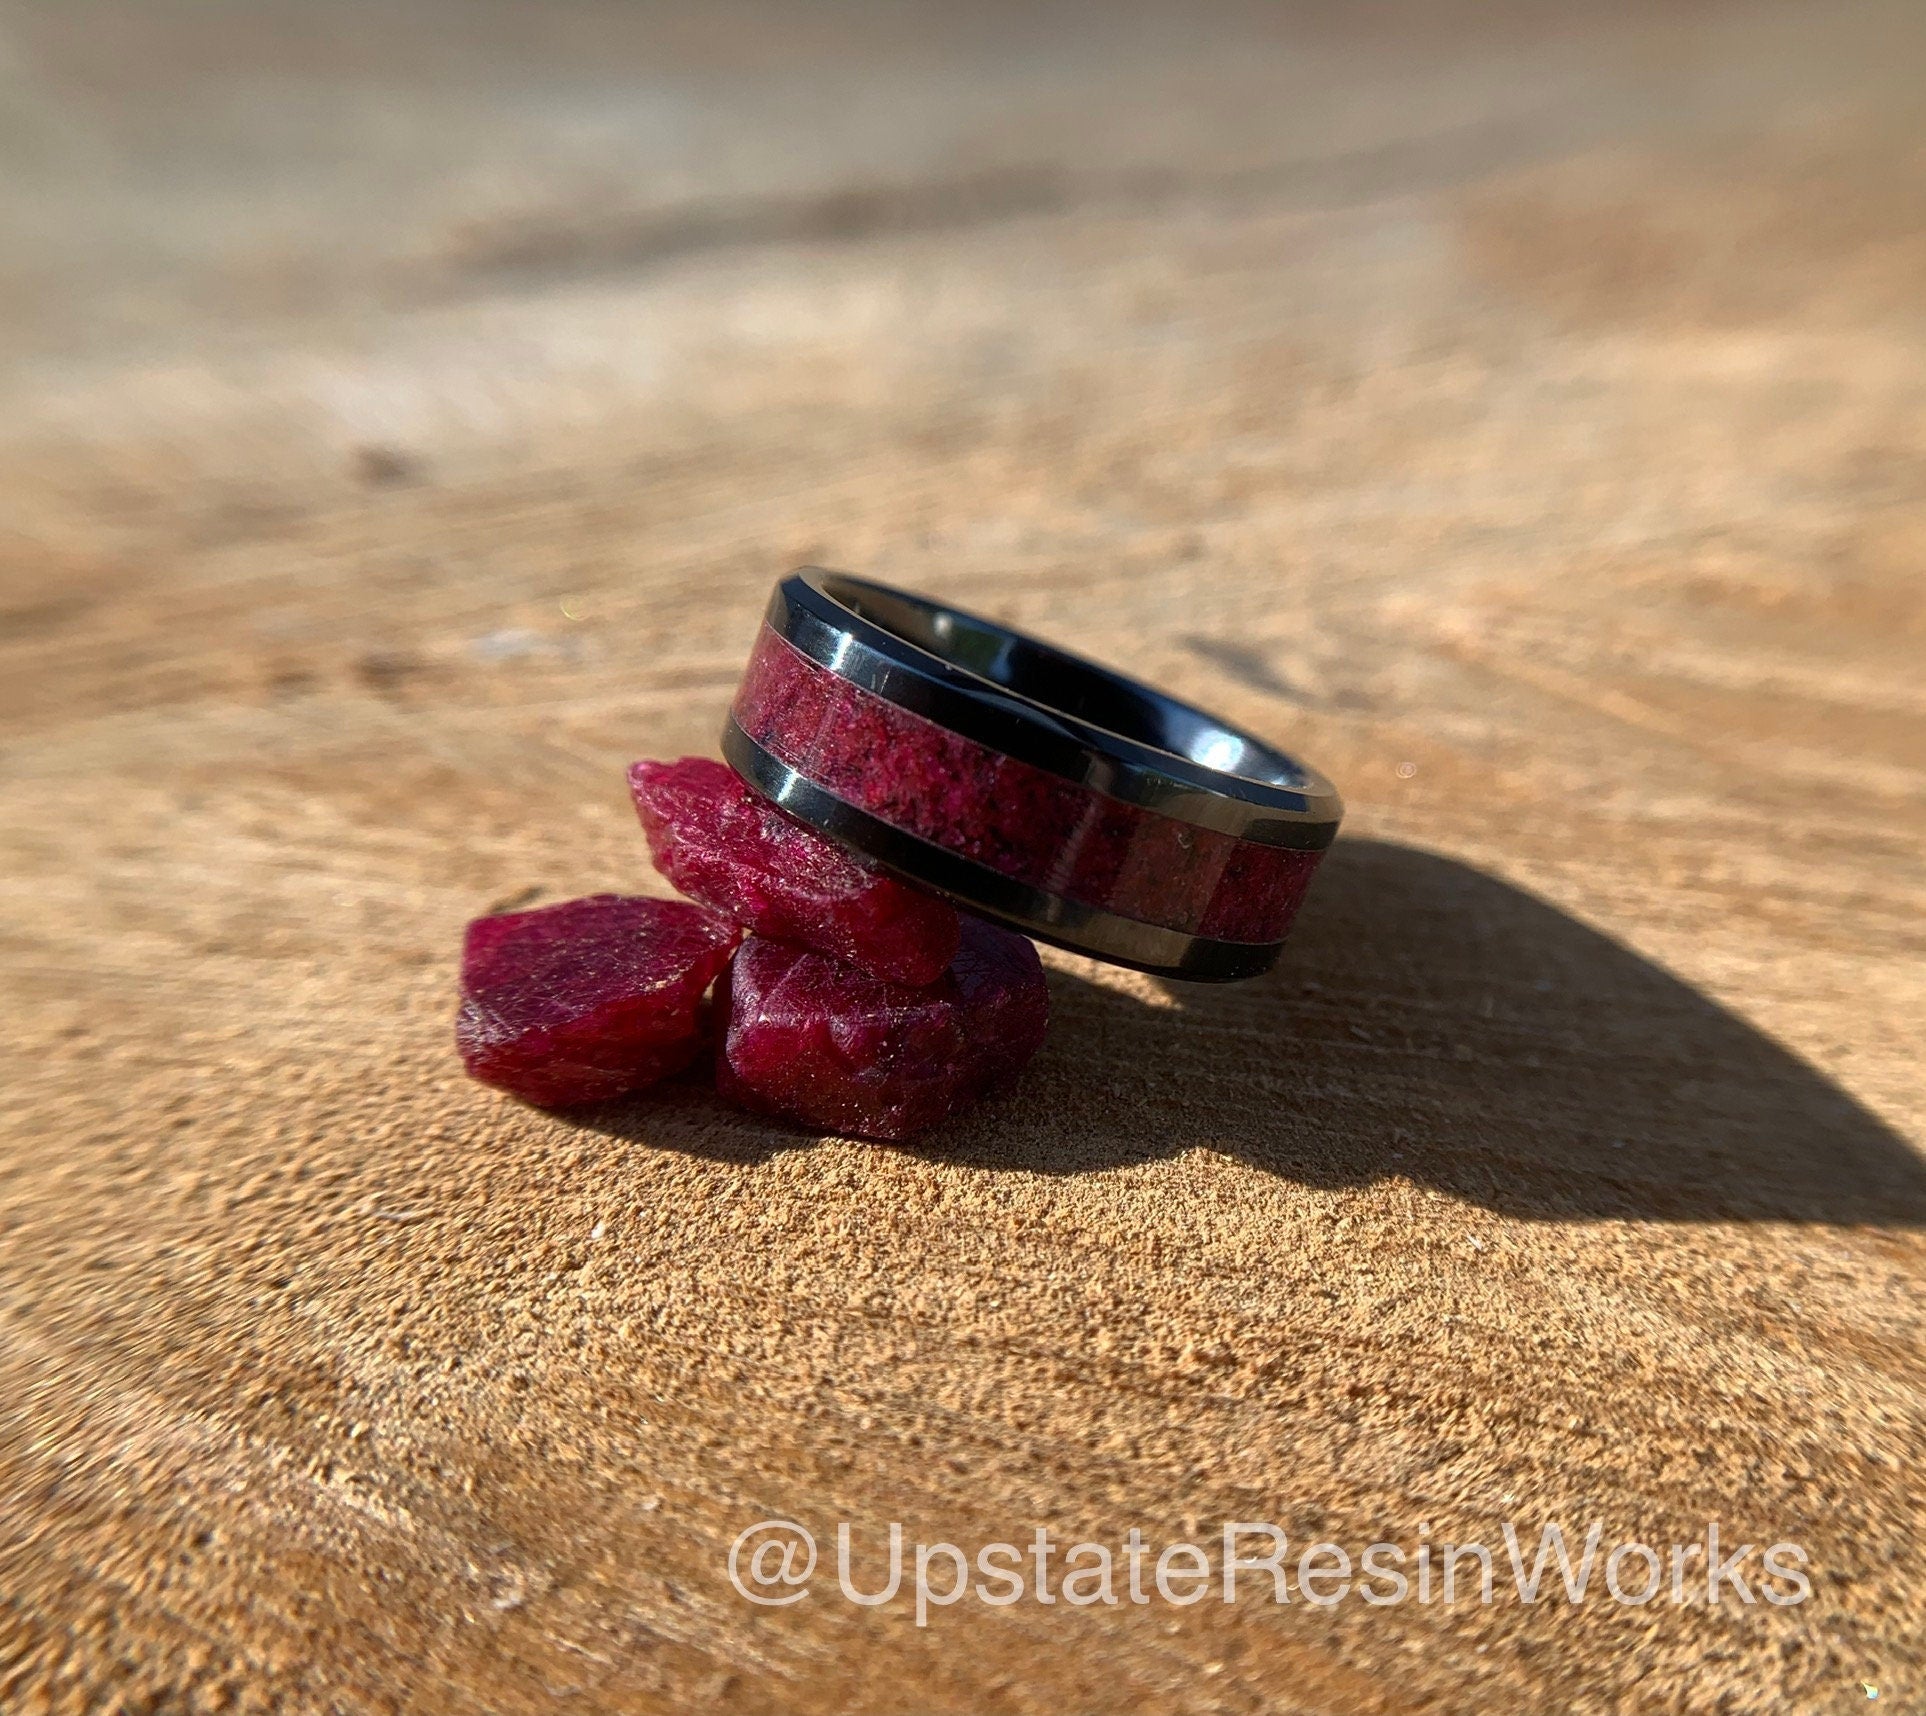 Power Up Your Style With A Ruby Ring – All Diamond